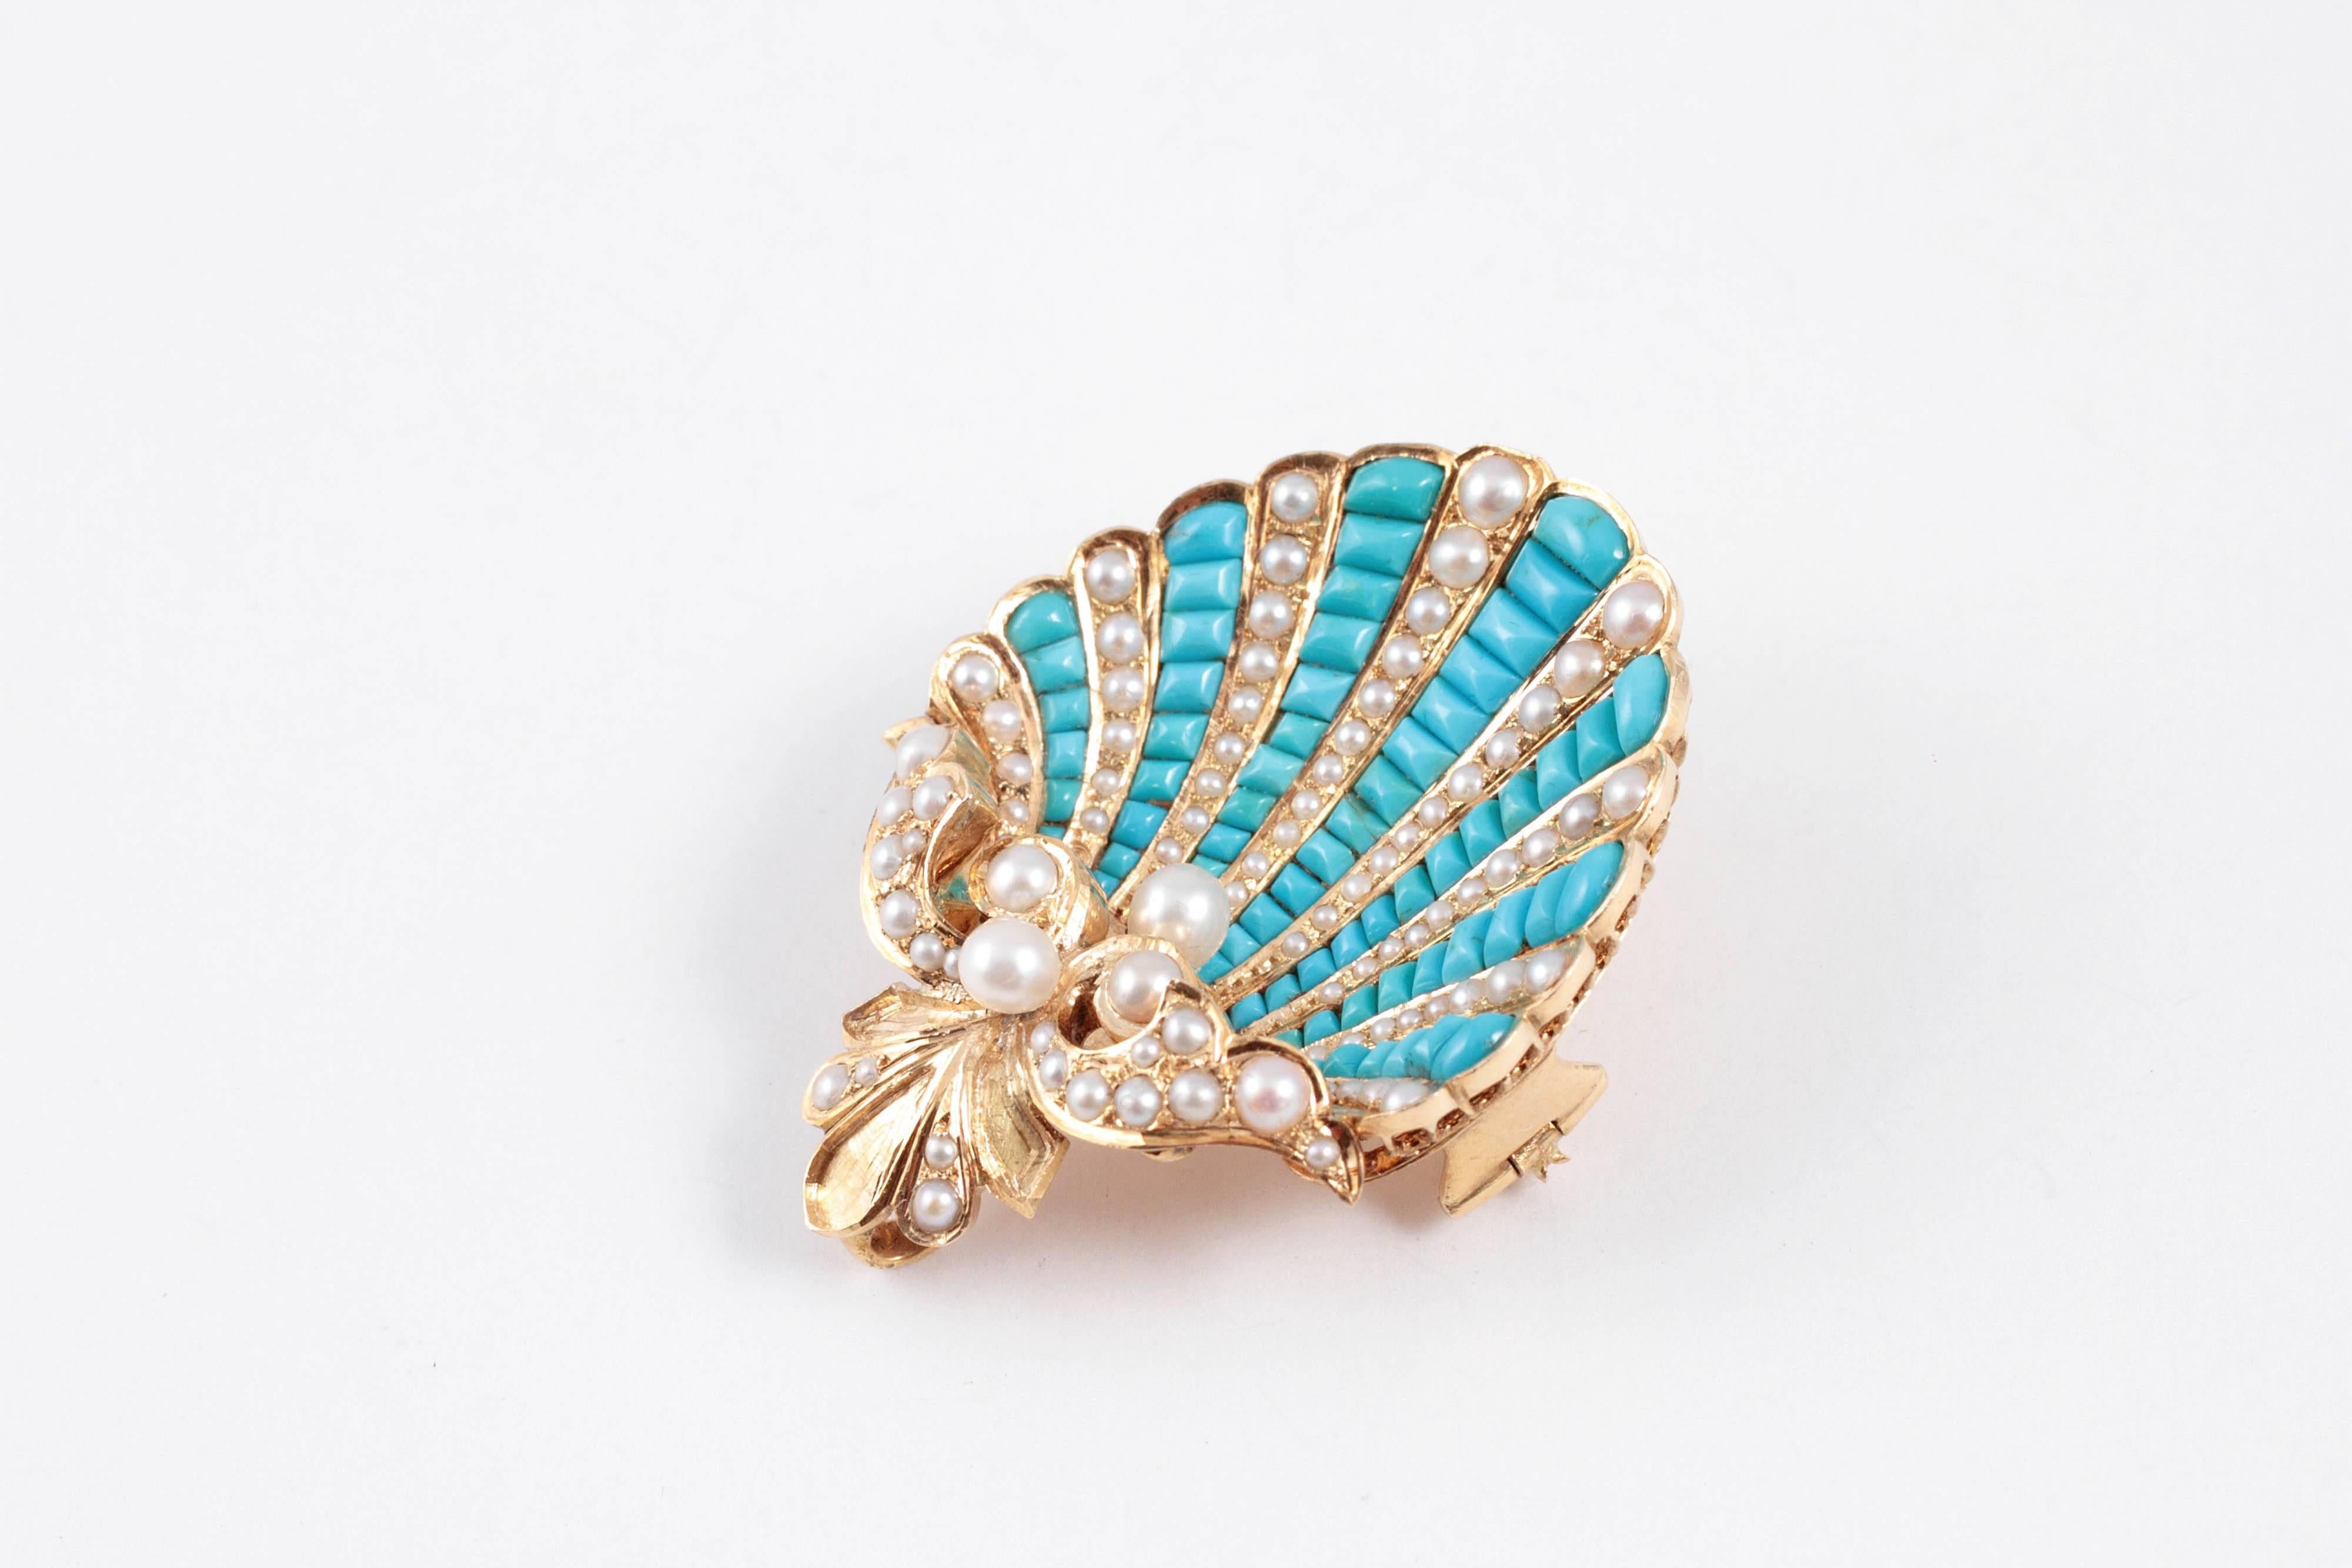 A treasure from the late Victorian period, this lovely 18 karat yellow gold brooch features rows of turquoise alternating with pearls and is secured with a pin clasp.  The bonus is that it can also be worn as a pendant! 